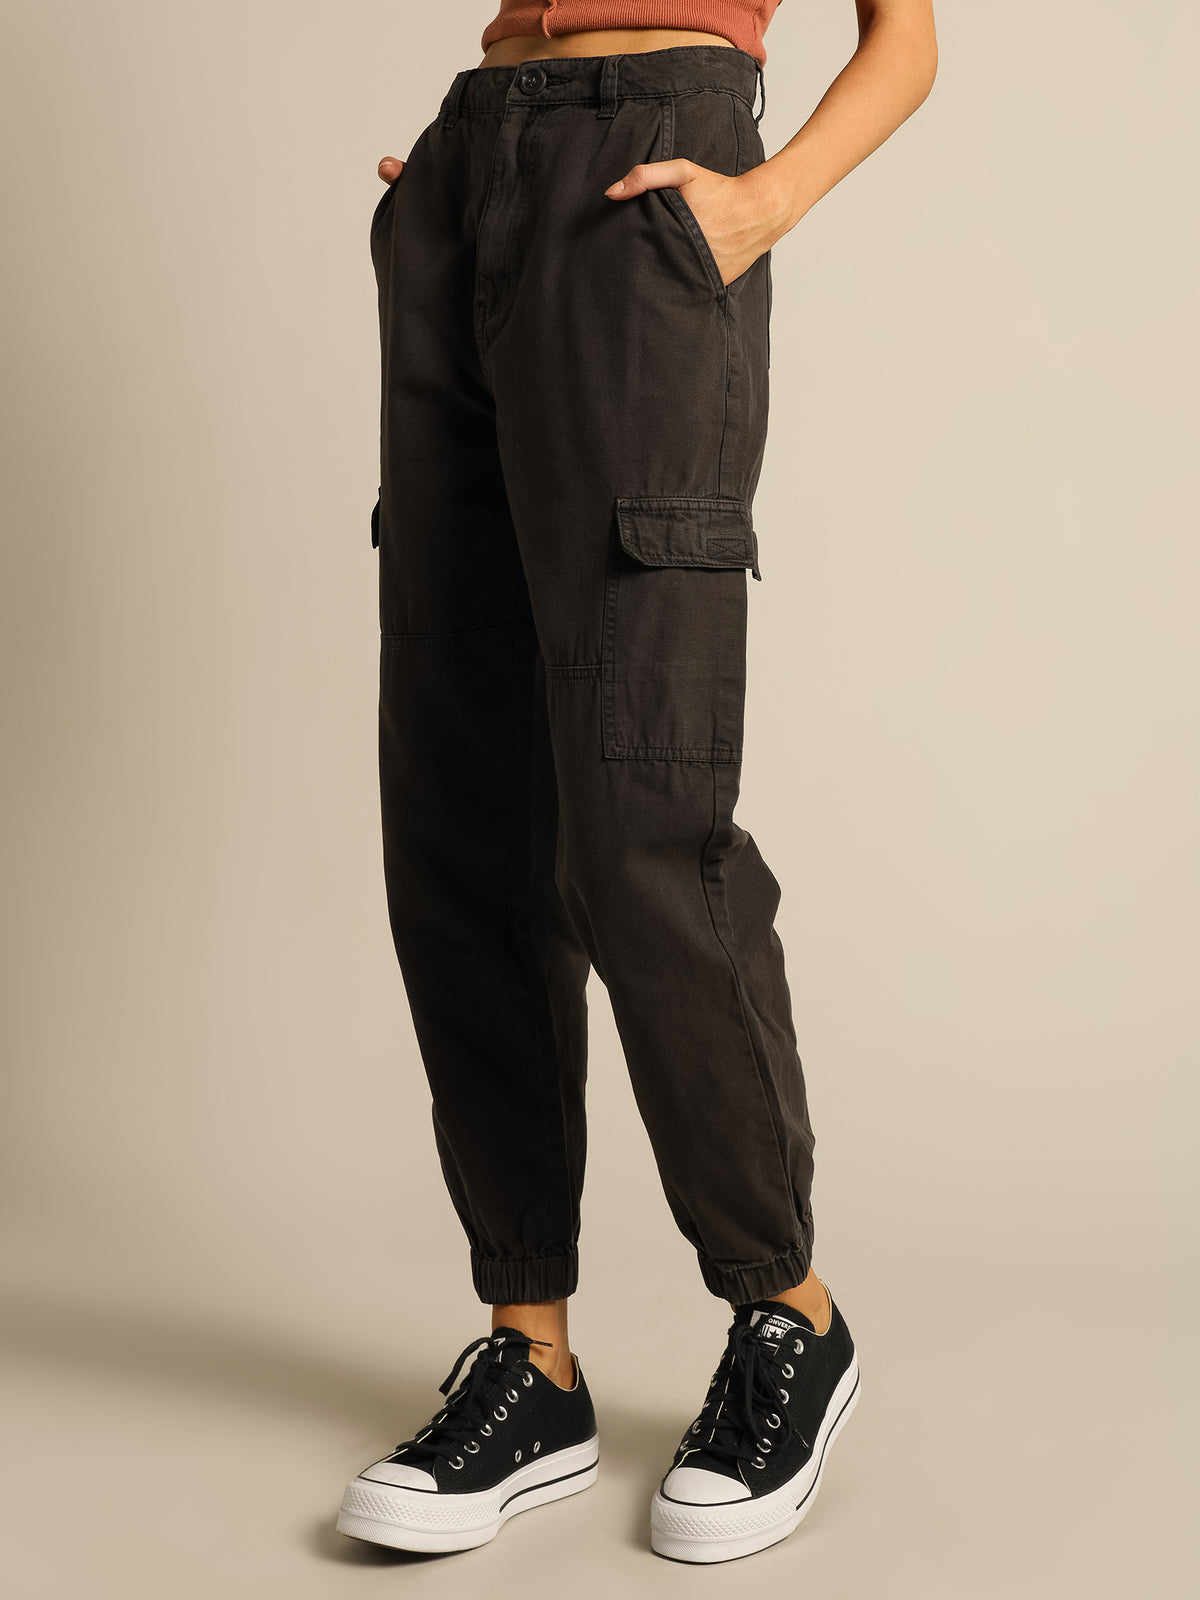 Sian Cargo Pants in Washed Black